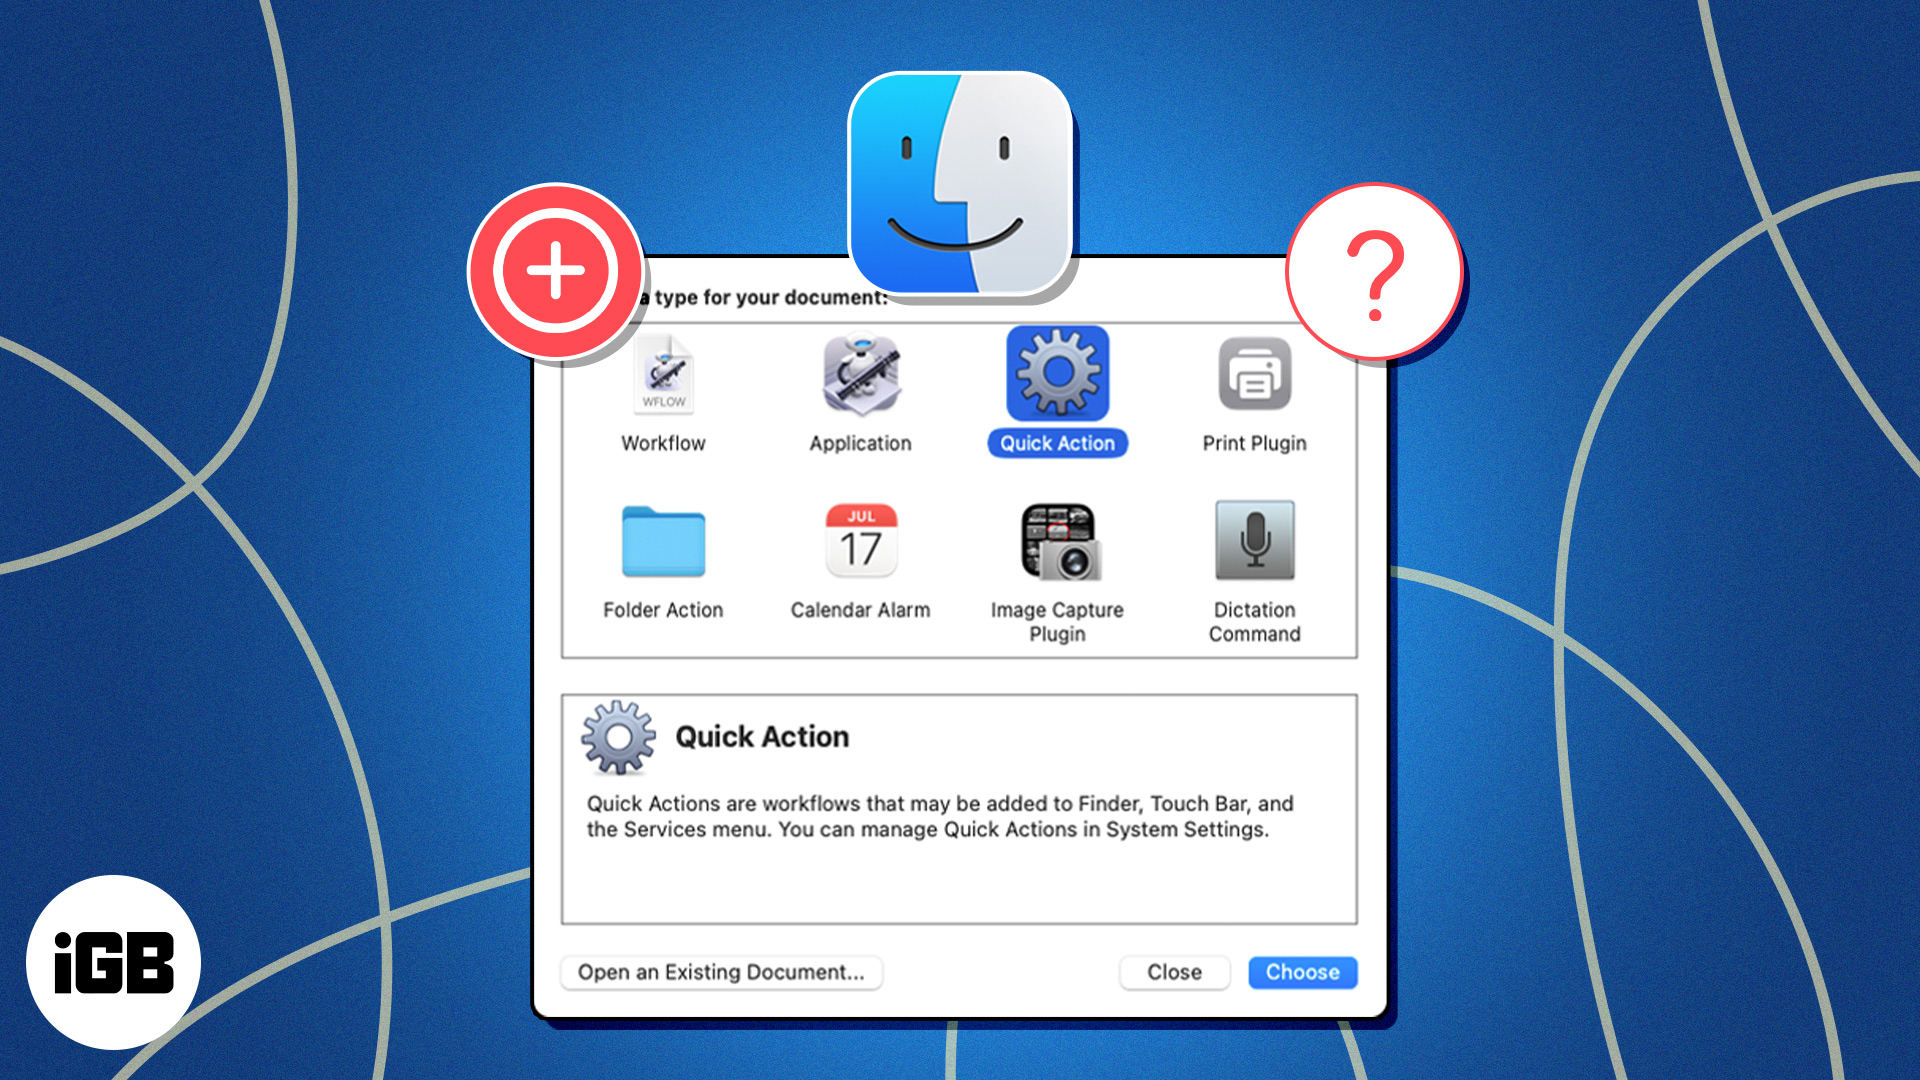 How to add and use Quick Actions in Finder on a Mac